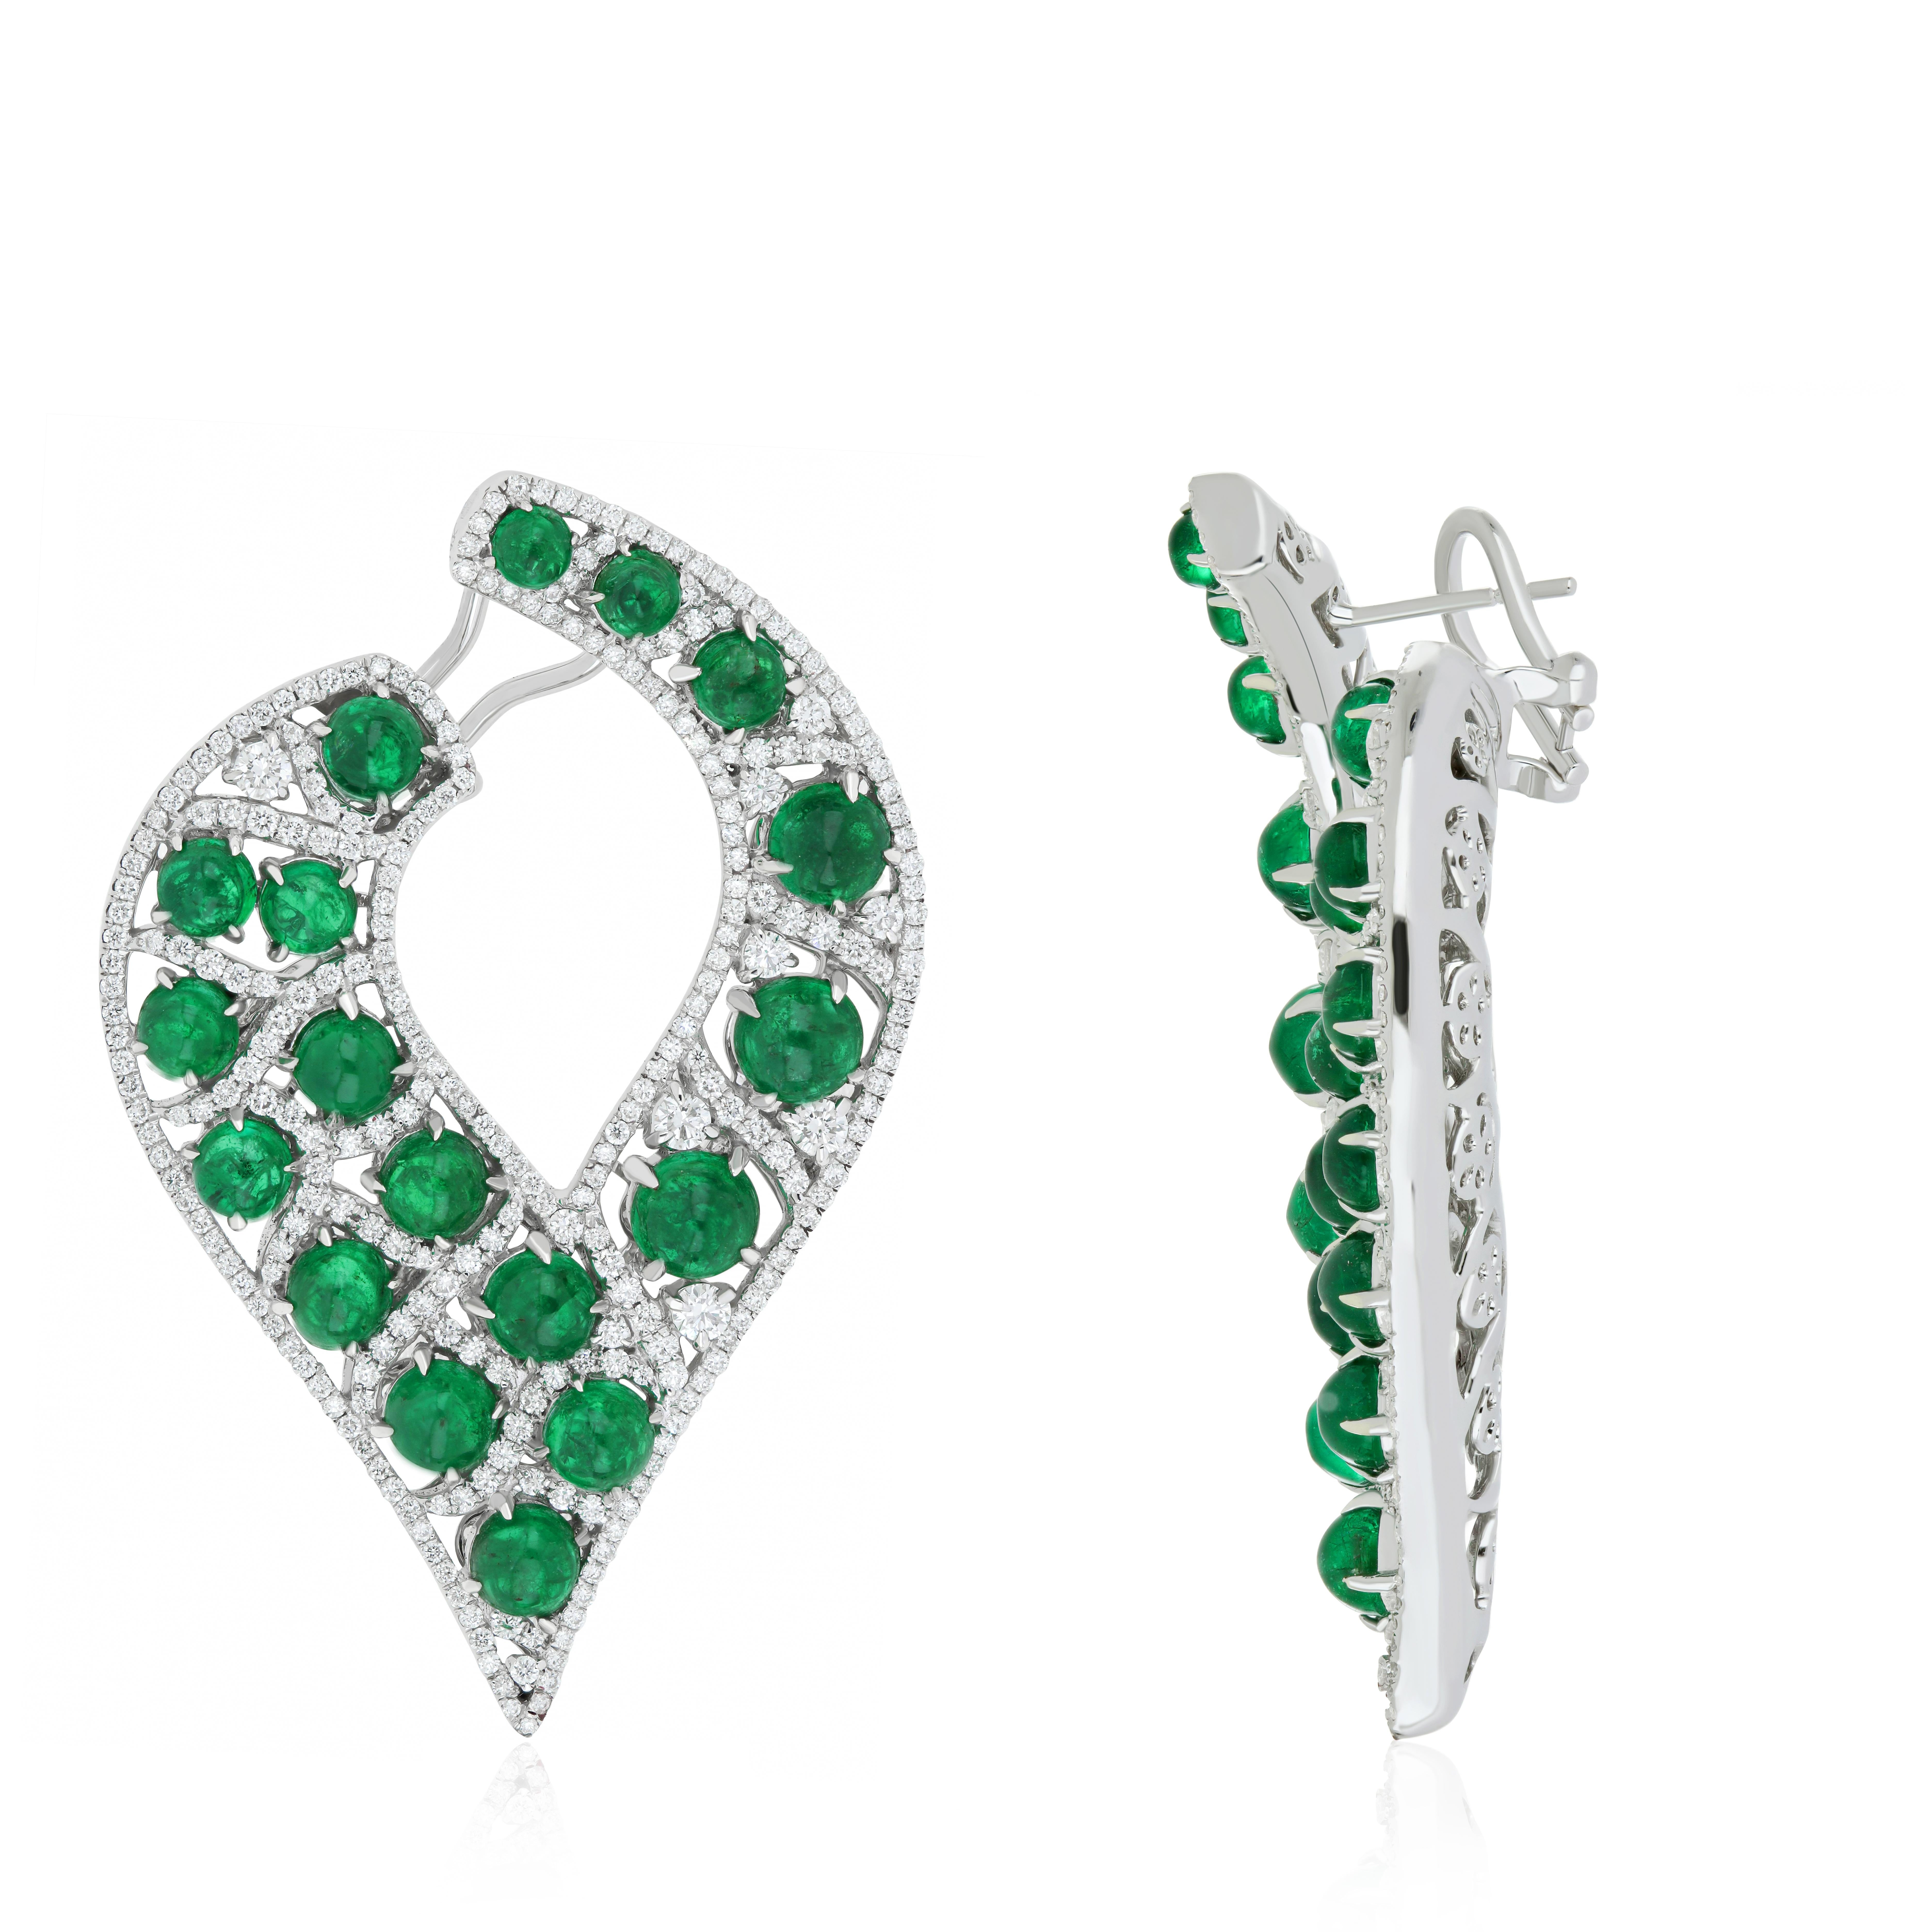 Elegant and Exquisitely detailed 14k White Gold Earring with 17.3Cts (approx.) Tyre shape Emerald and accented with Micro pave set Diamonds, weighing approx.  3.7CT's (approx.). total carat weight to further enhance the beauty of the Earring.